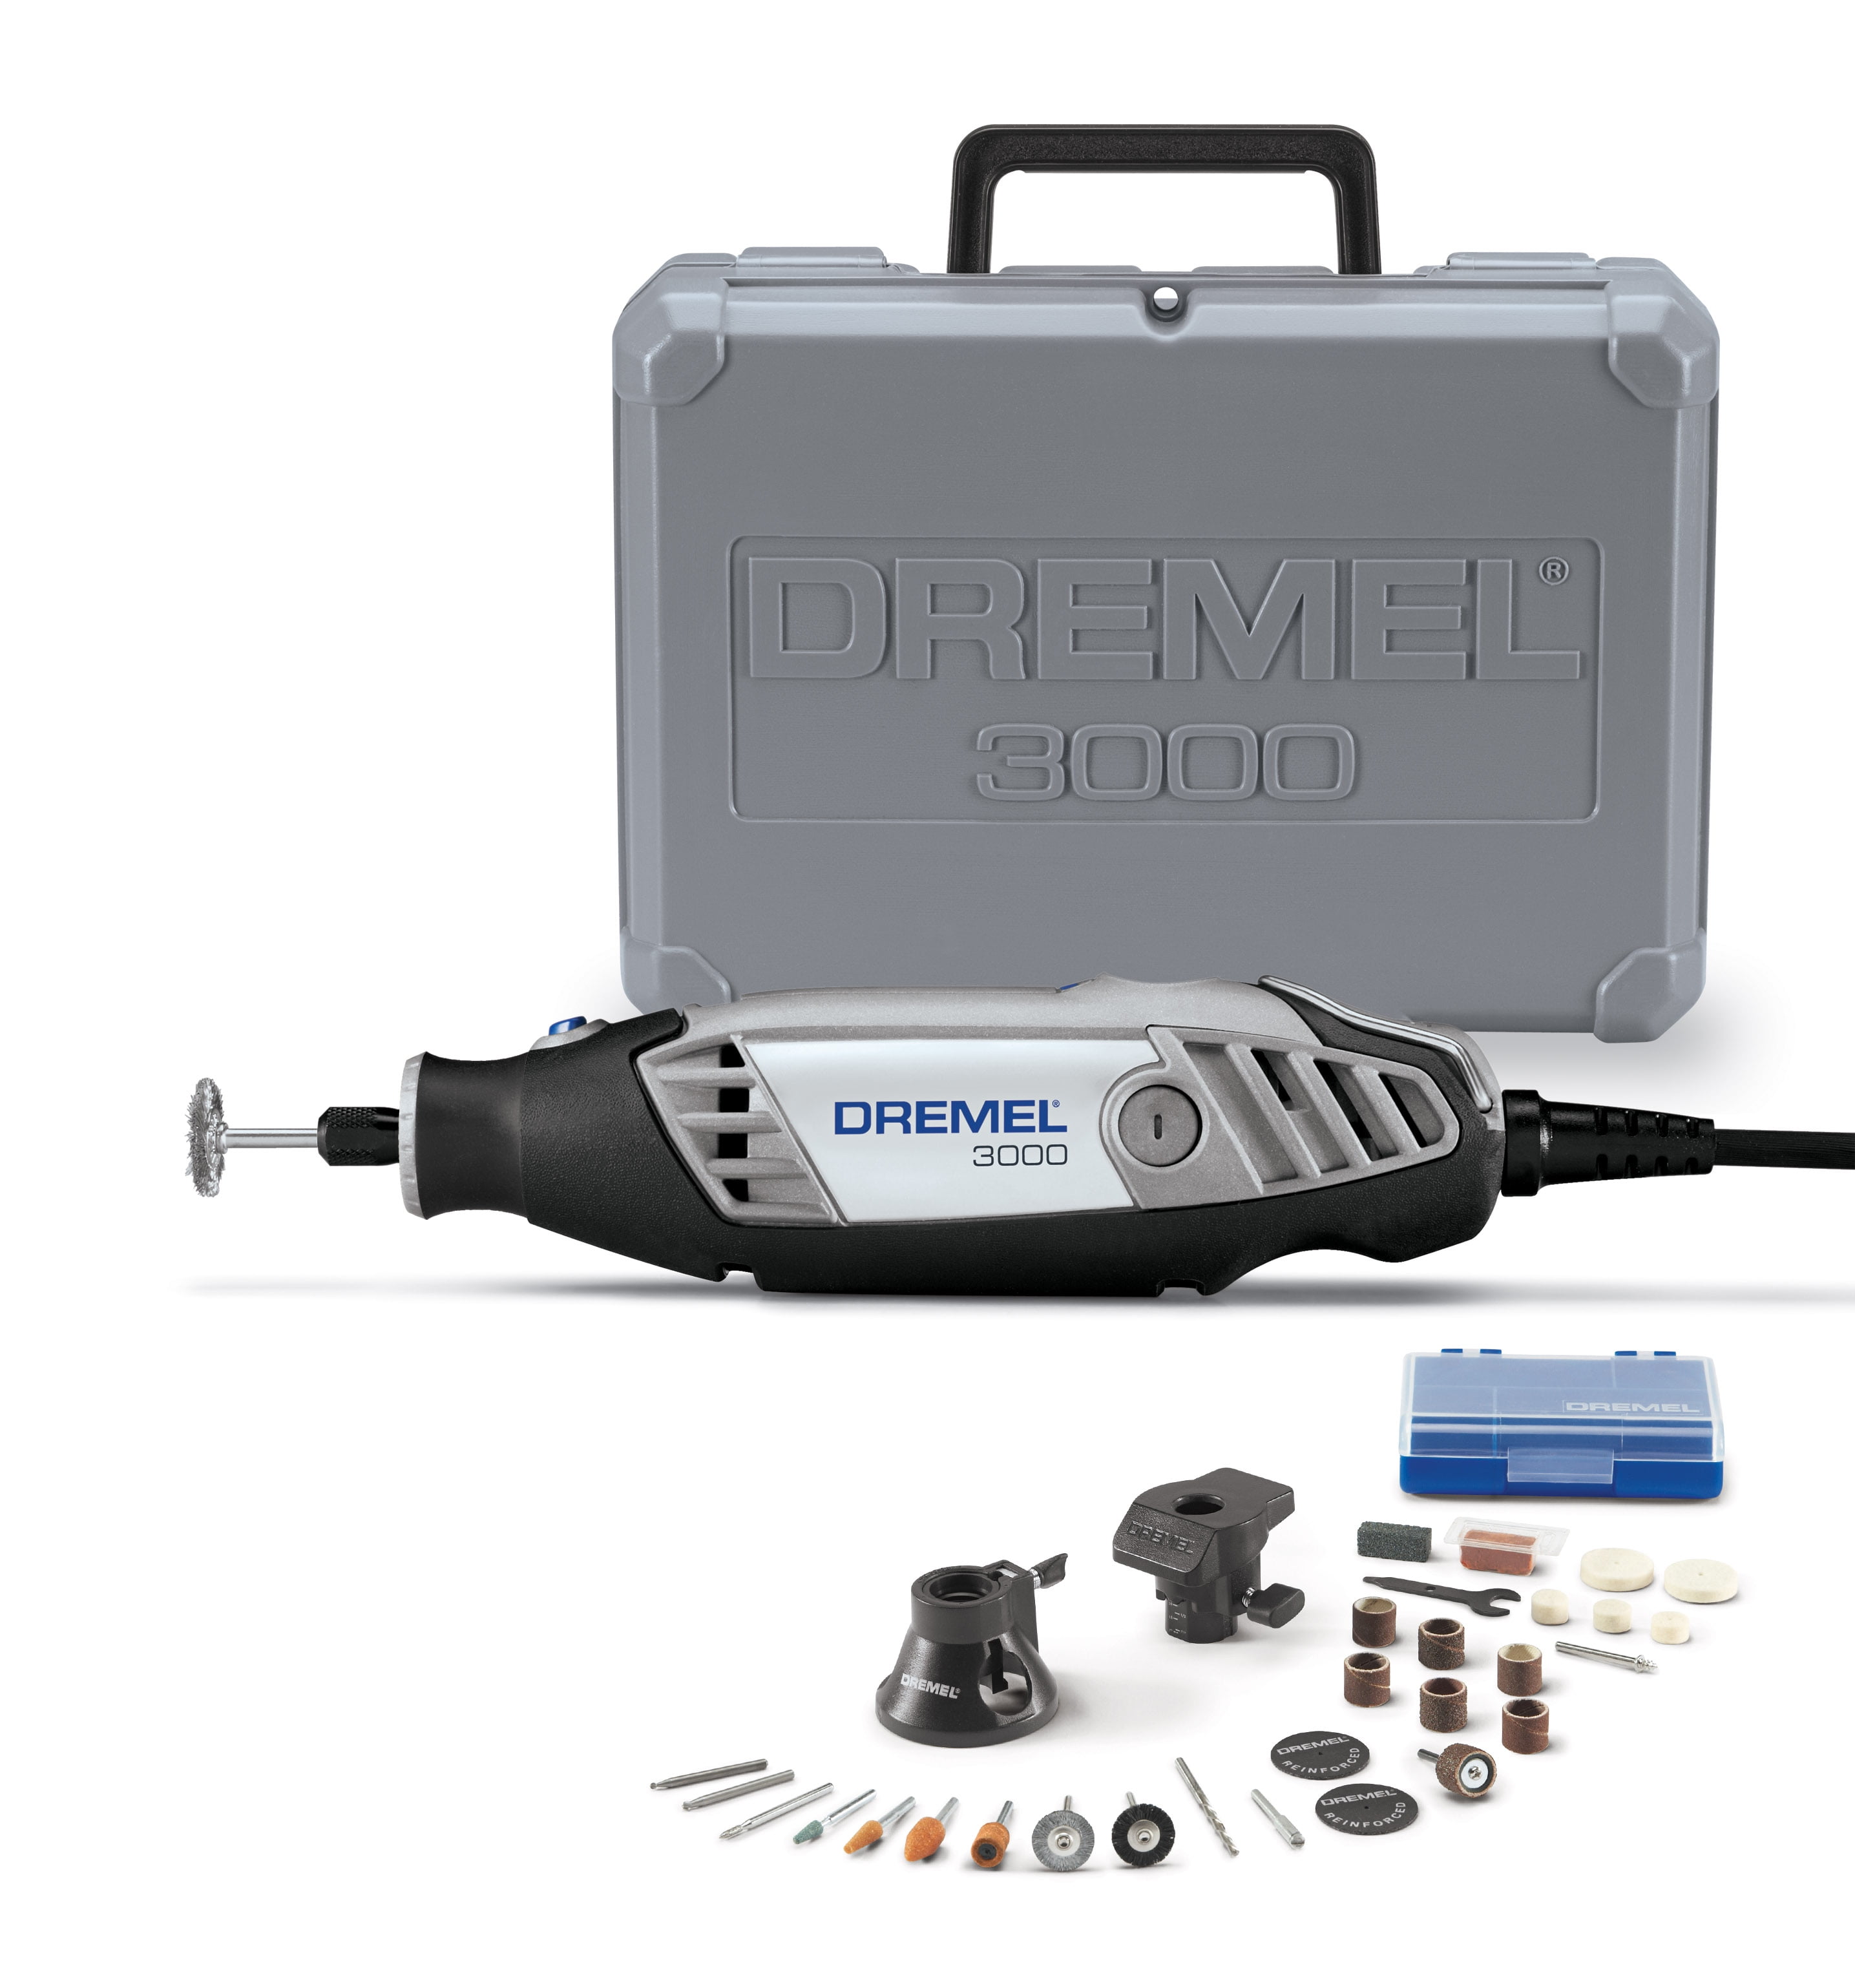 Dremel 3000-2/28 Variable Speed Rotary Tool Kit, 2 Attachments & 28  Accessories, Perfect for Routing, Metal Cutting, Wood Carving, and Polishing